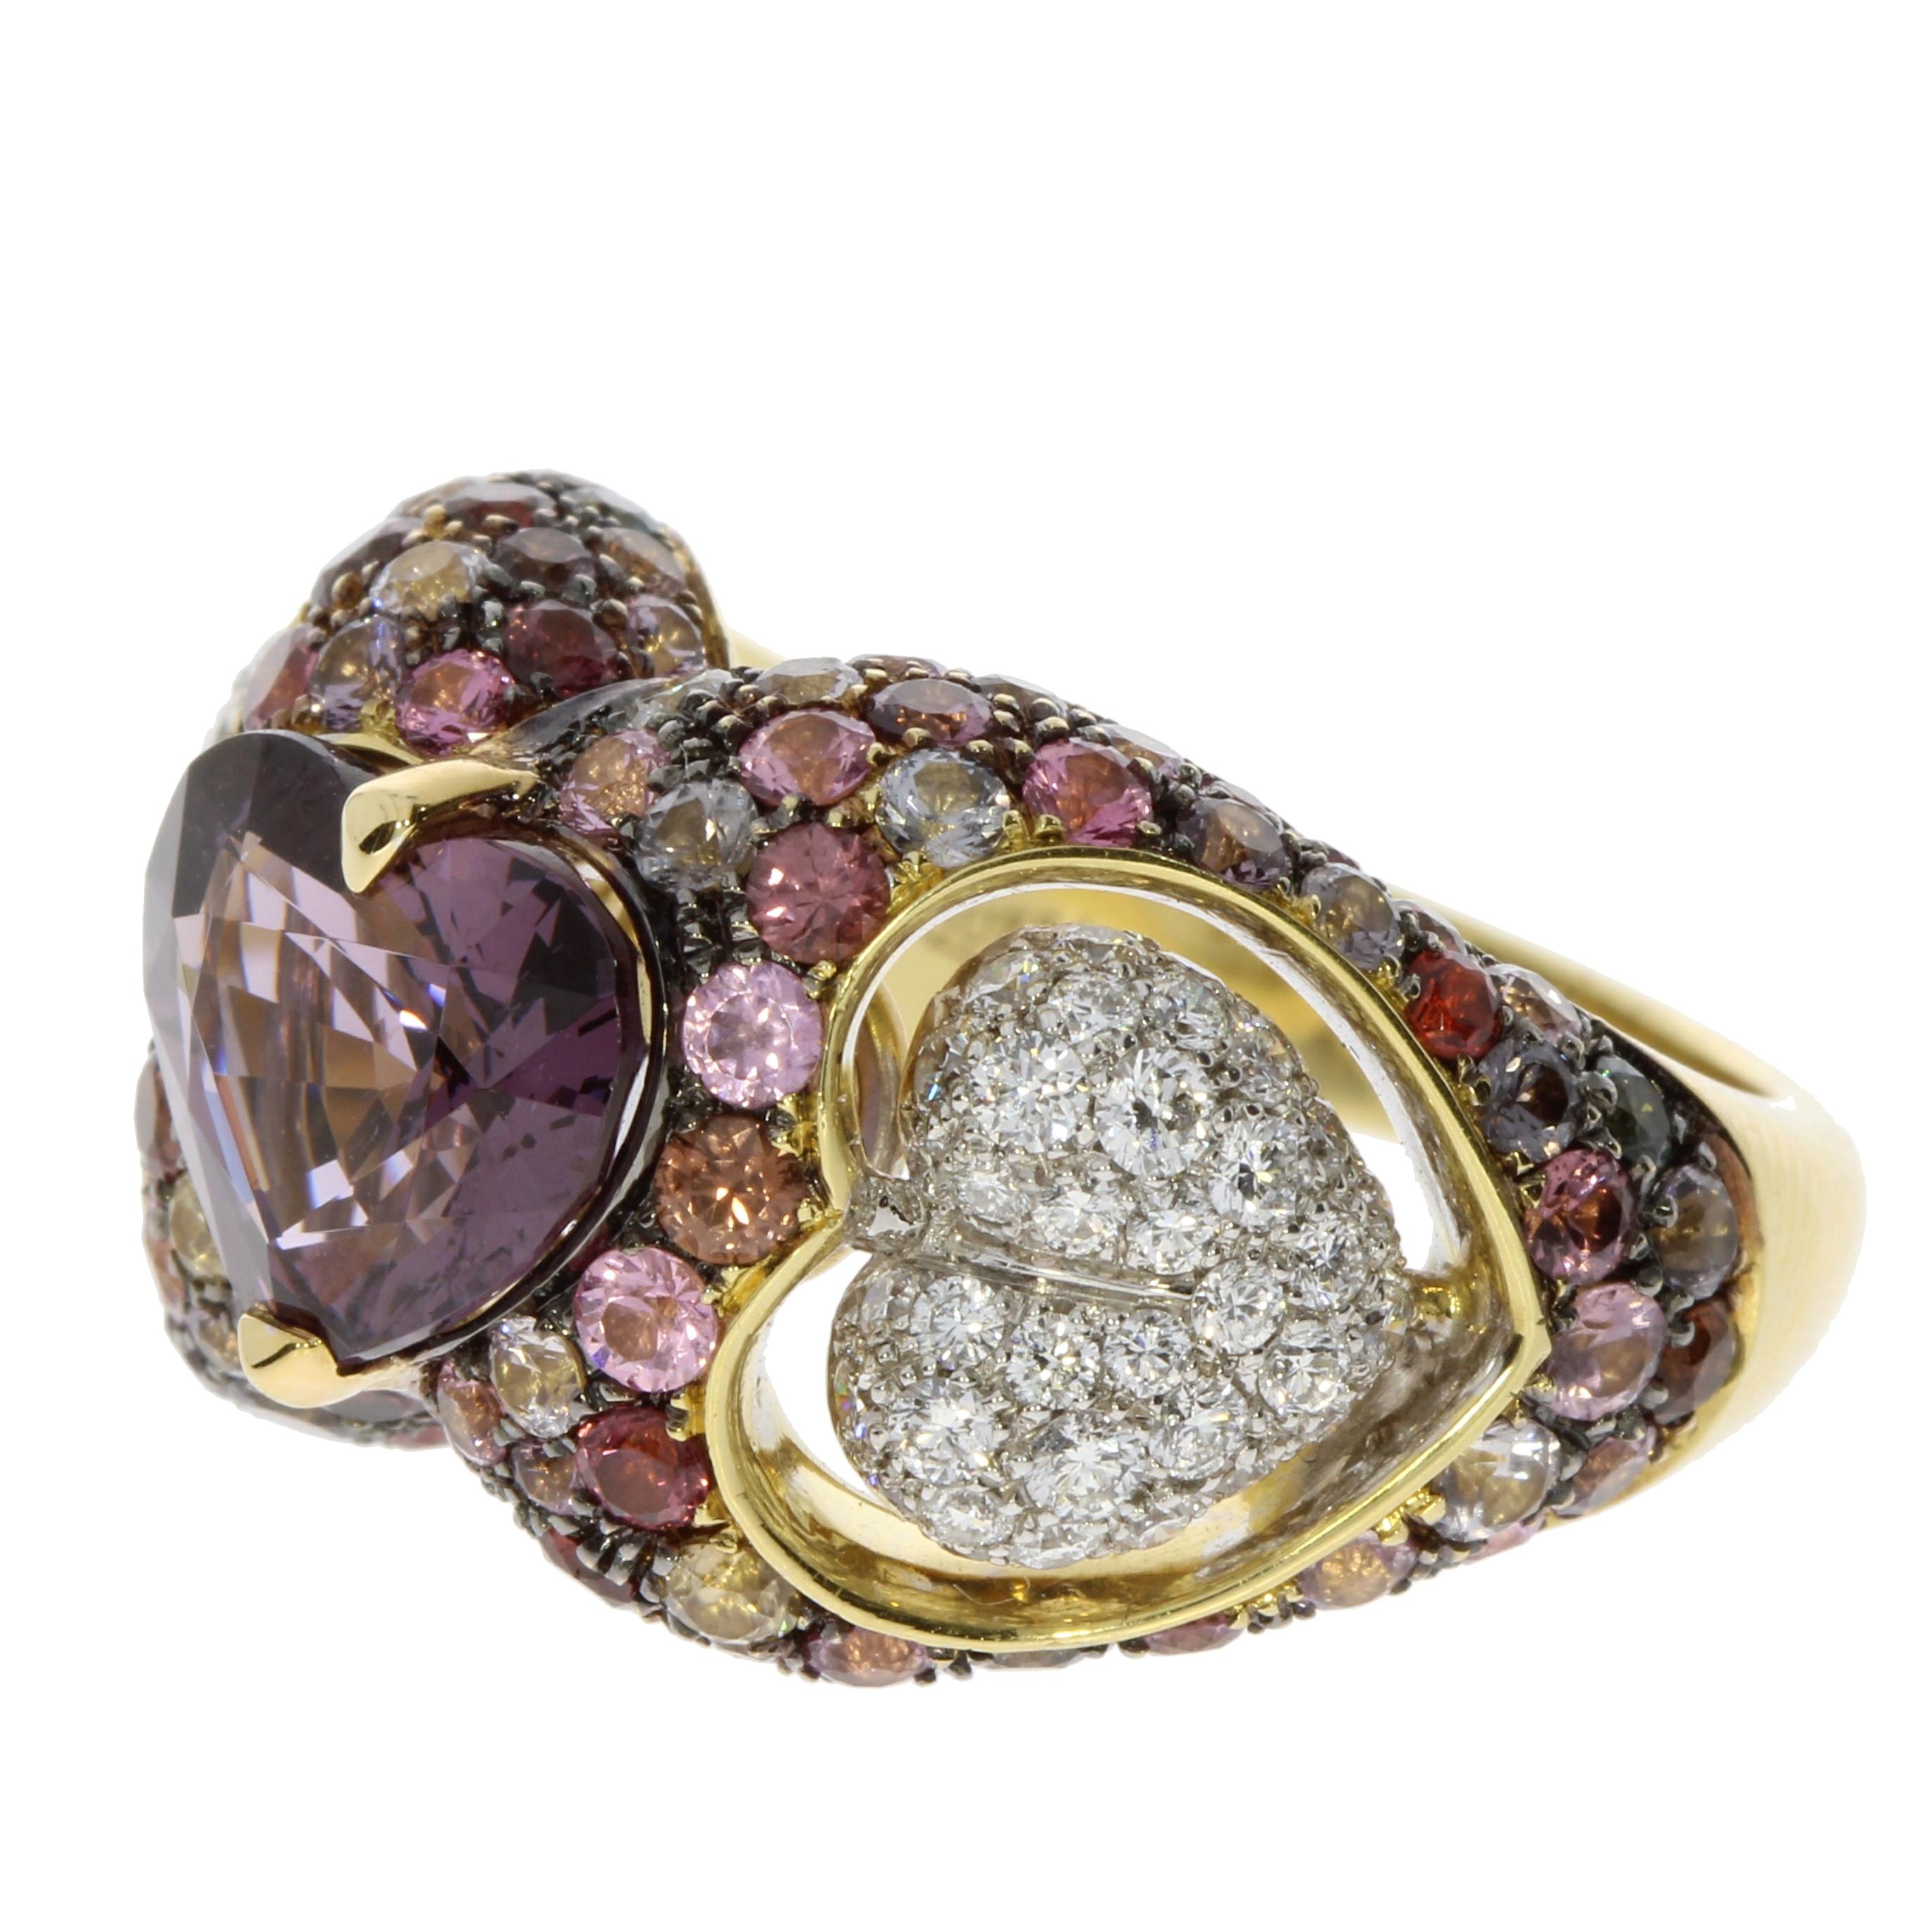 A vivid and intriguing Heart shaped Purple Spinel seats between of two suspended hearts of round brilliant cut White Diamonds. The ring is completed by a glittering pave of mixed-colour Spinels.
This ring is an original new engagement ring but is